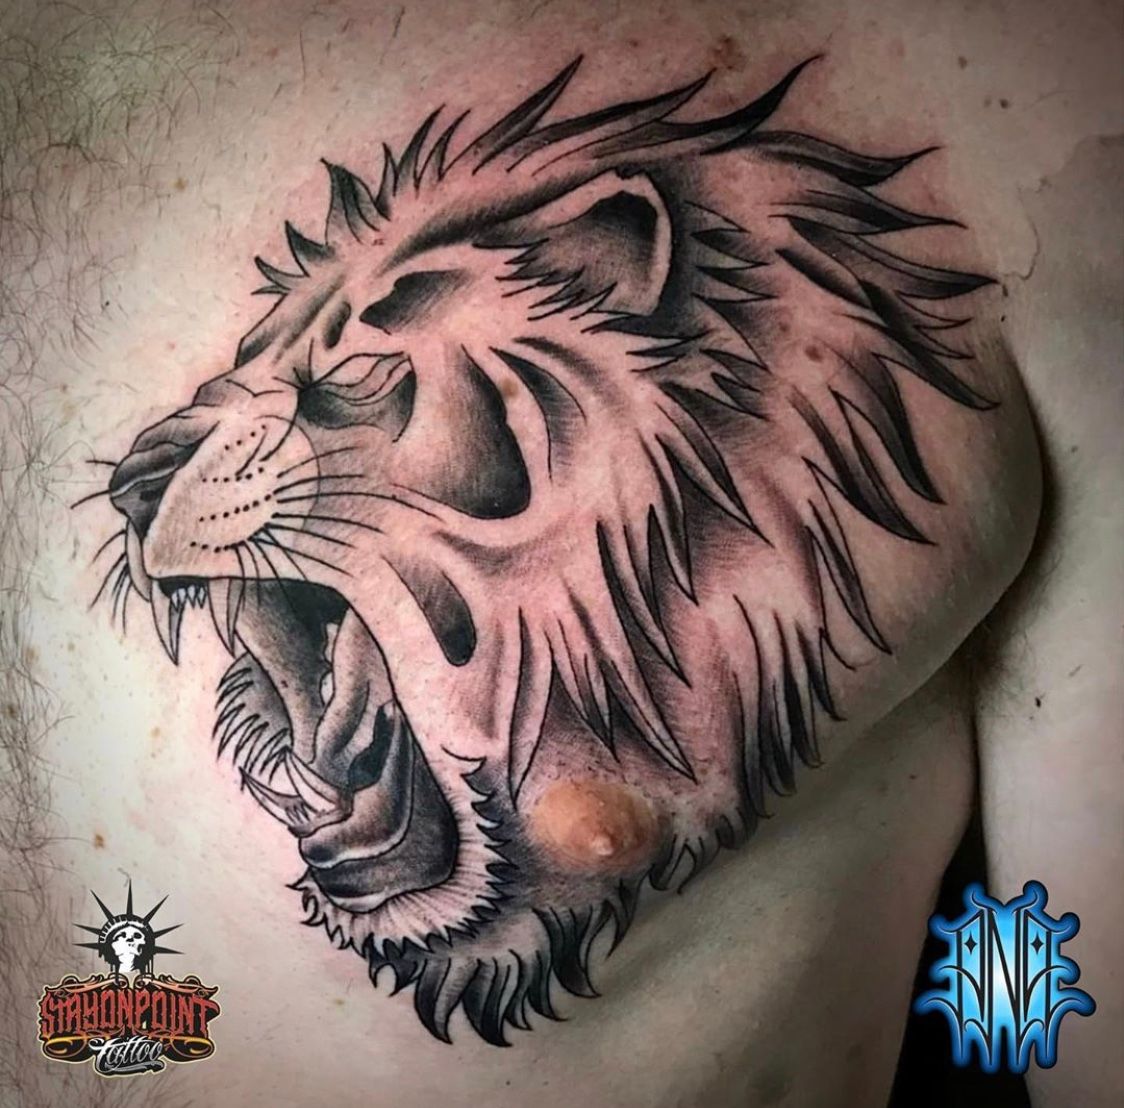 Tattoo uploaded by Stayonpoint Tattoos • Neotraditional Lion chest piece by  Ana • Tattoodo